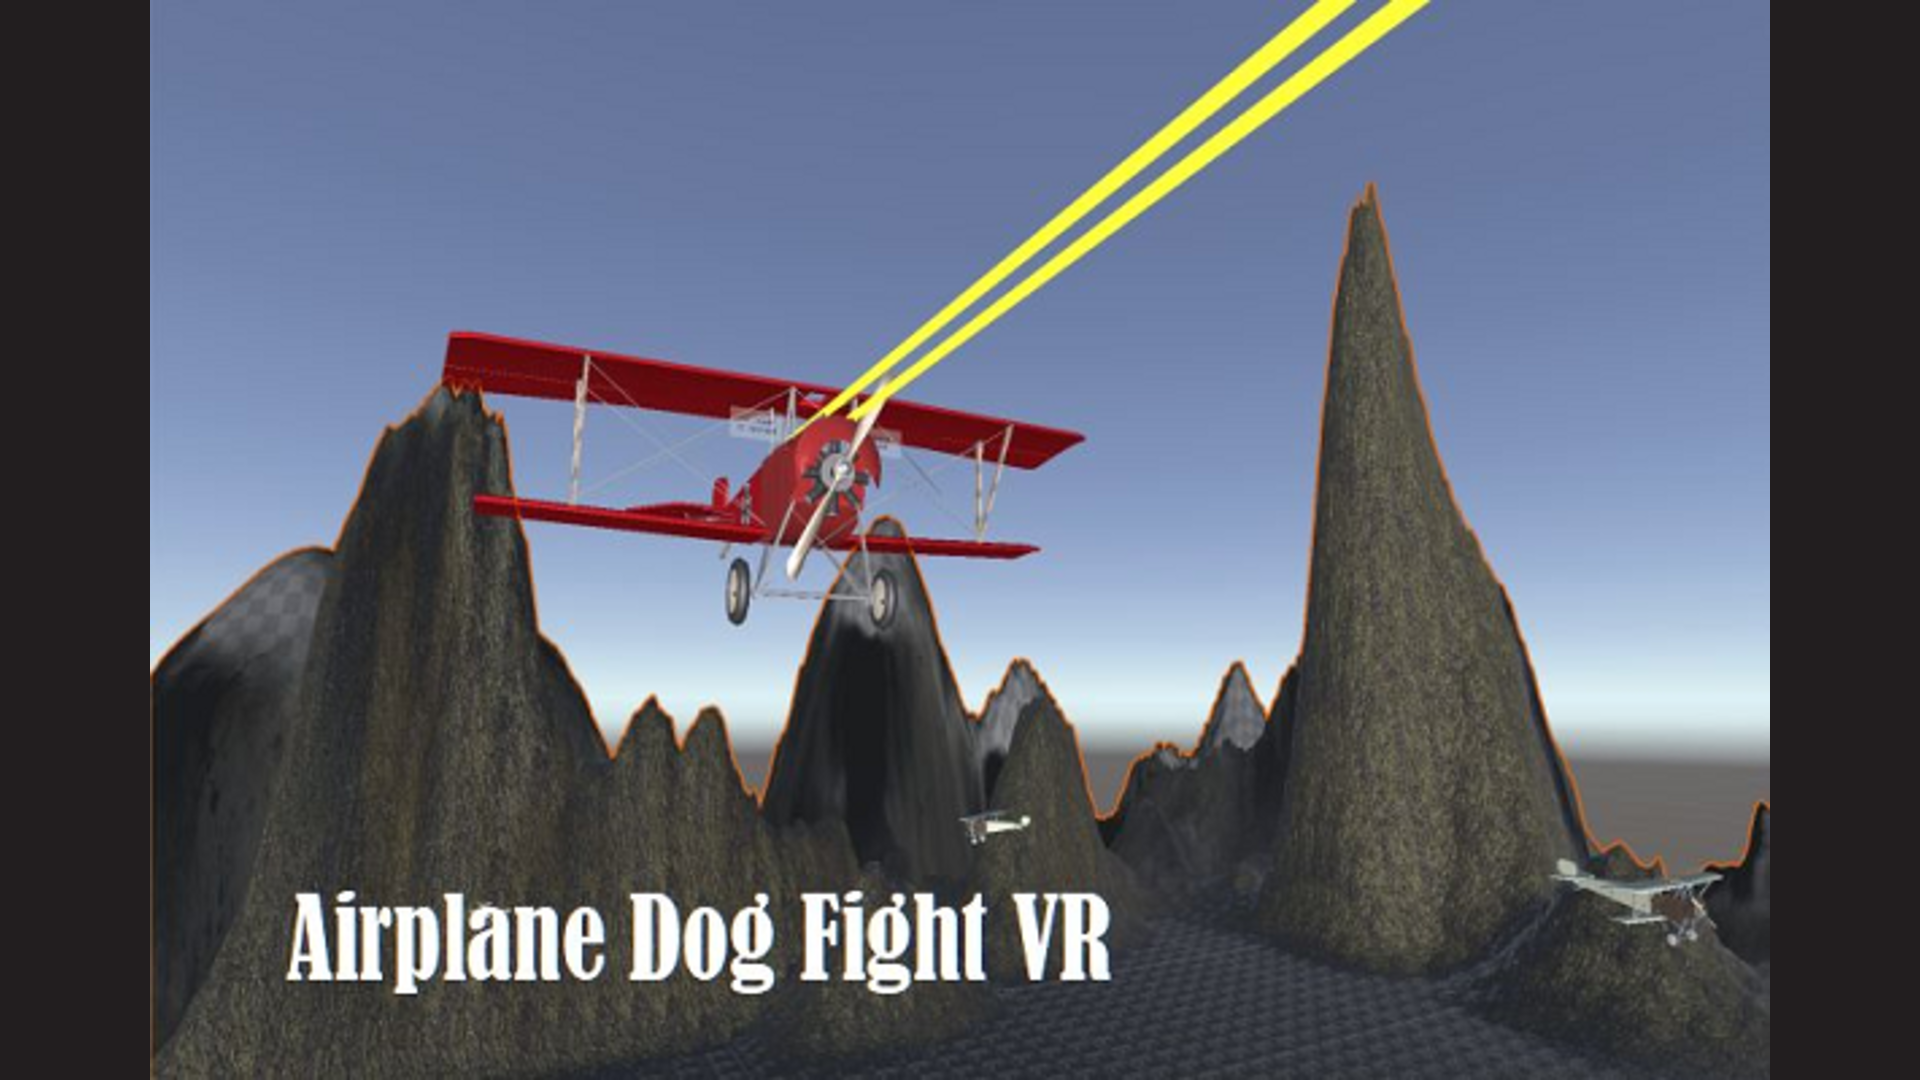 Thumbnail picture for Airplane Dogfight VR project